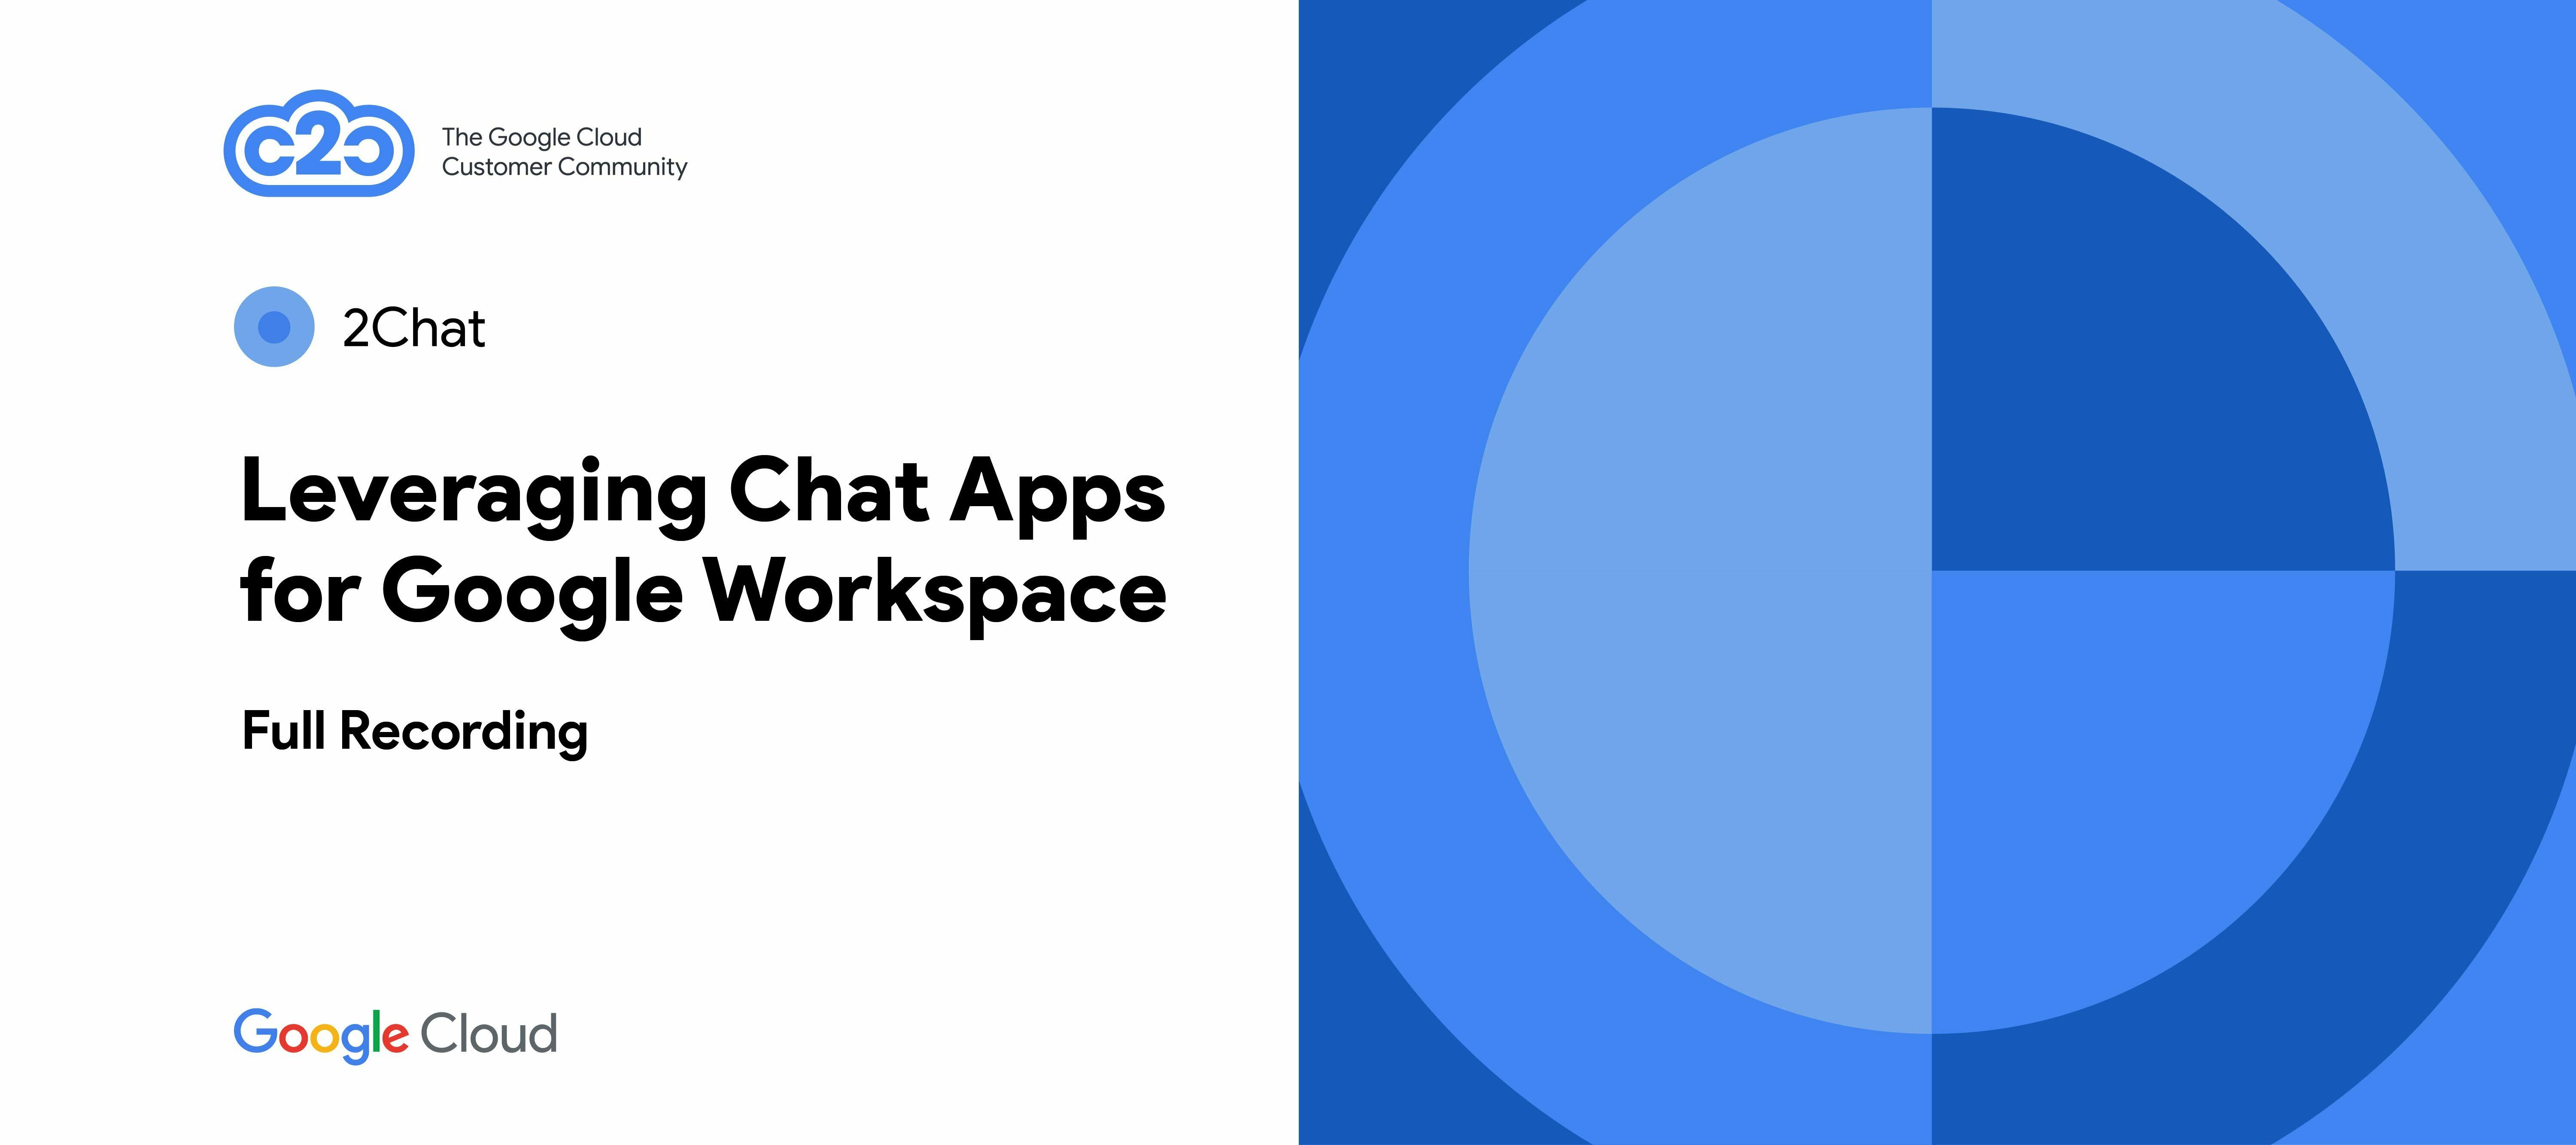 Leveraging Chat Apps for Google Workspace (full recording)